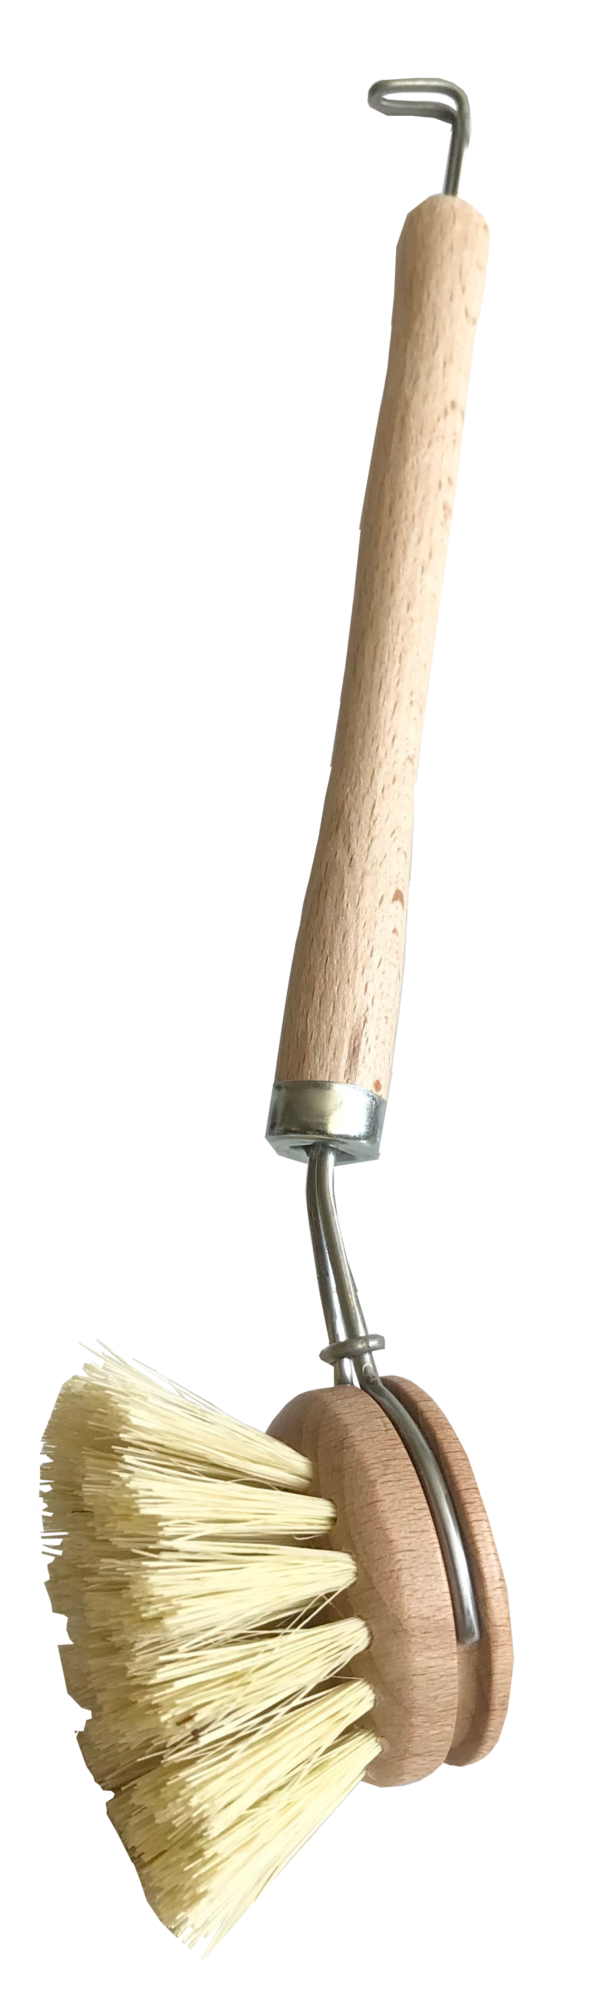 natural wood dishwashing brush with round head and cream natural bristles. Stainless steel hook on long wooden handle